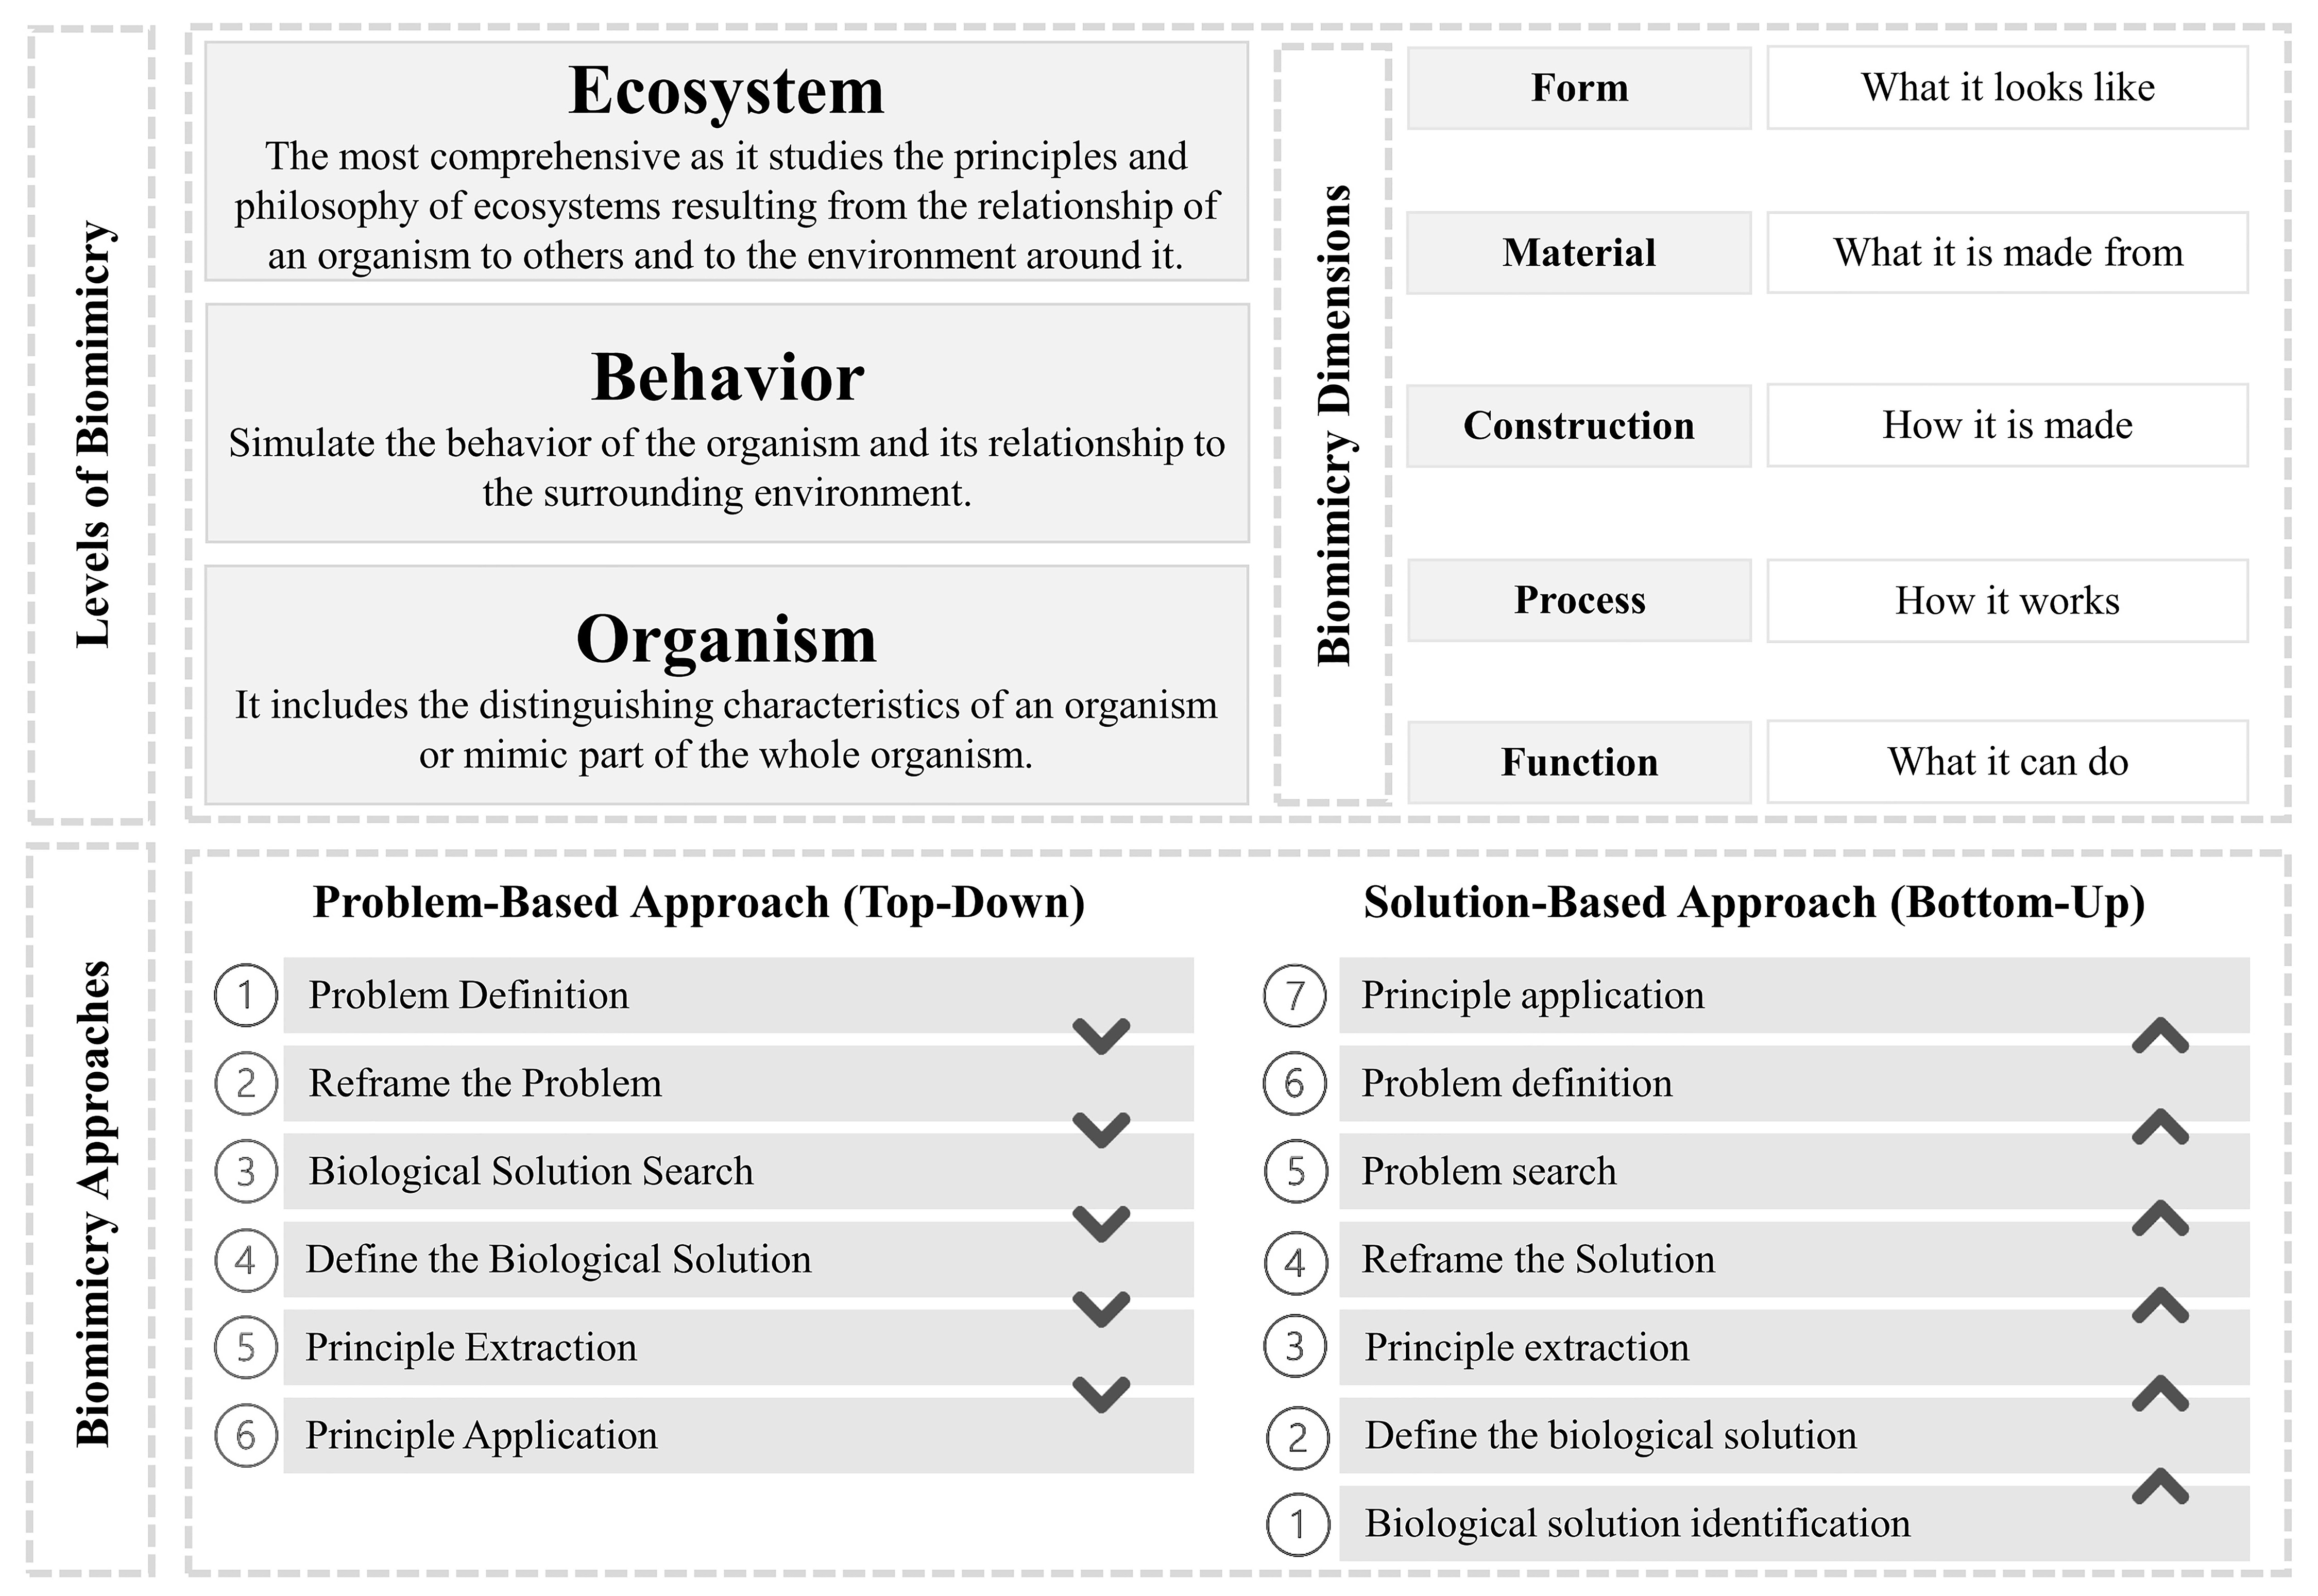 Levels, dimensions, and approaches of biomimicry [16,17,19,20].